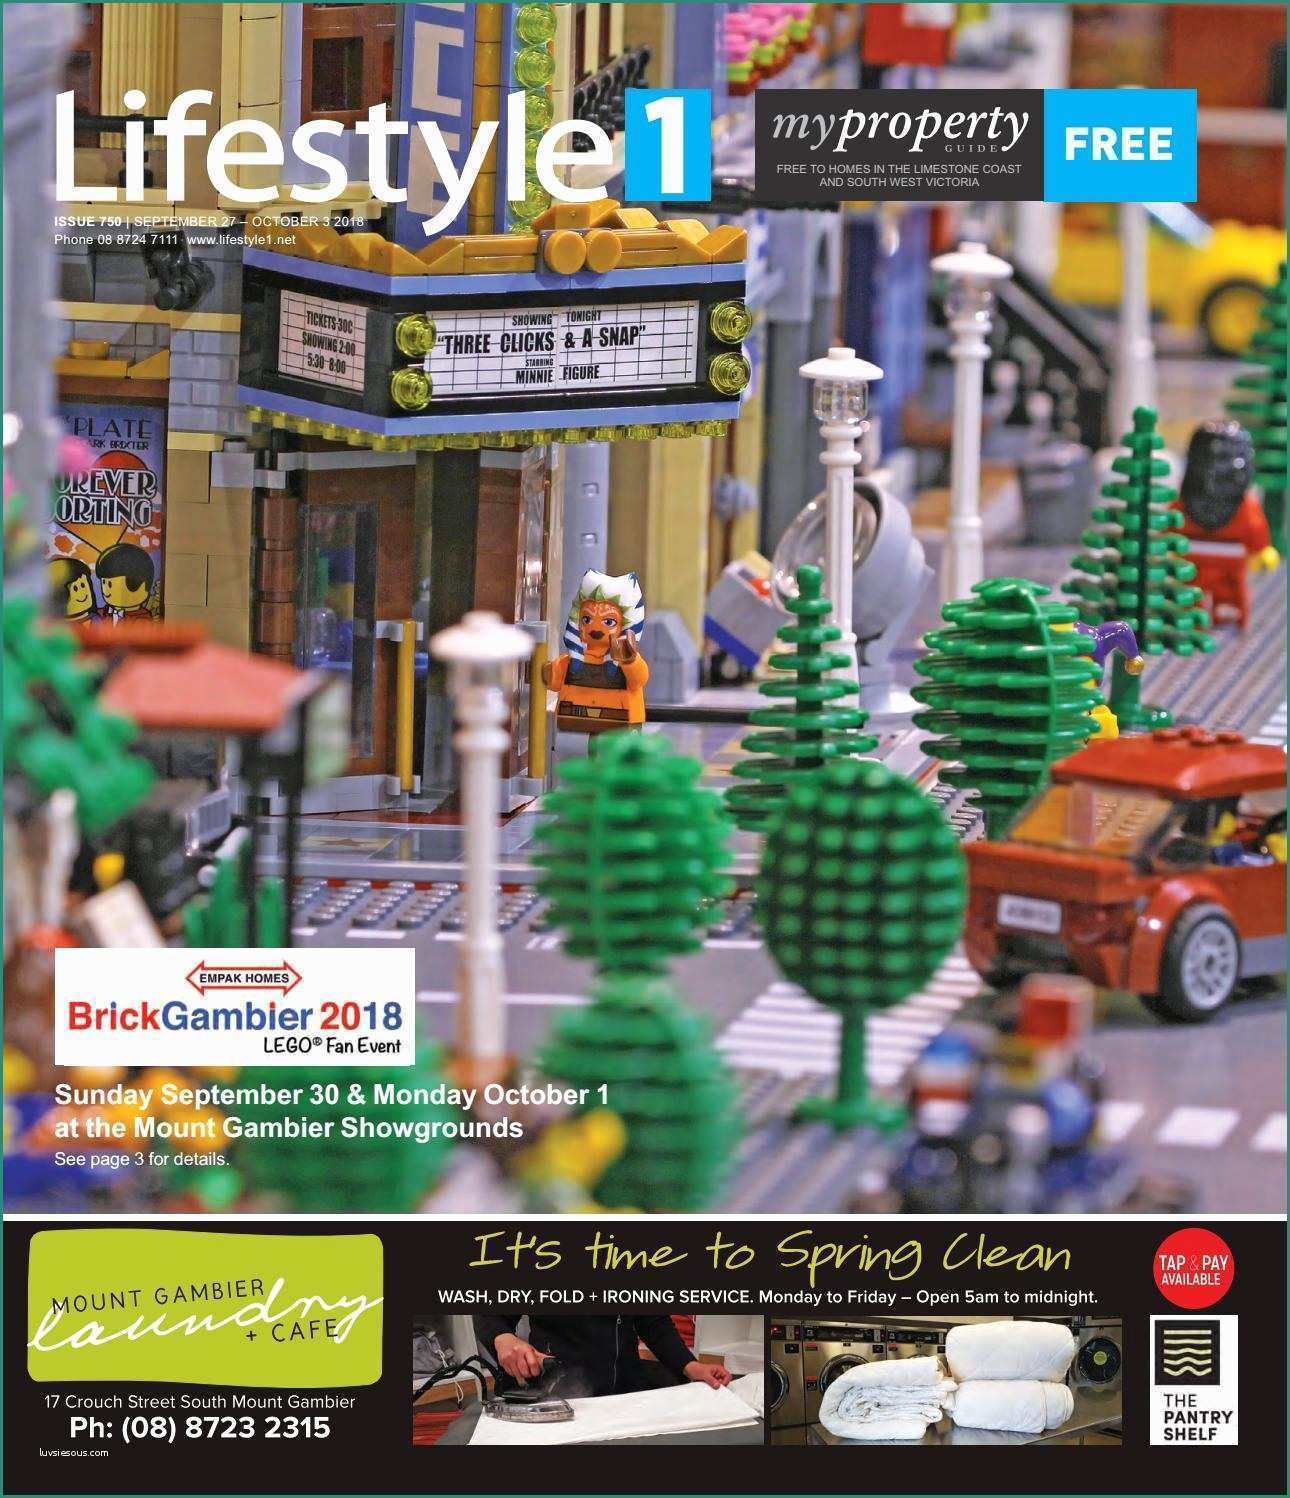 Pellet B Green E Lifestyle1 Magazine issue 750 by Lifestyle1 issuu